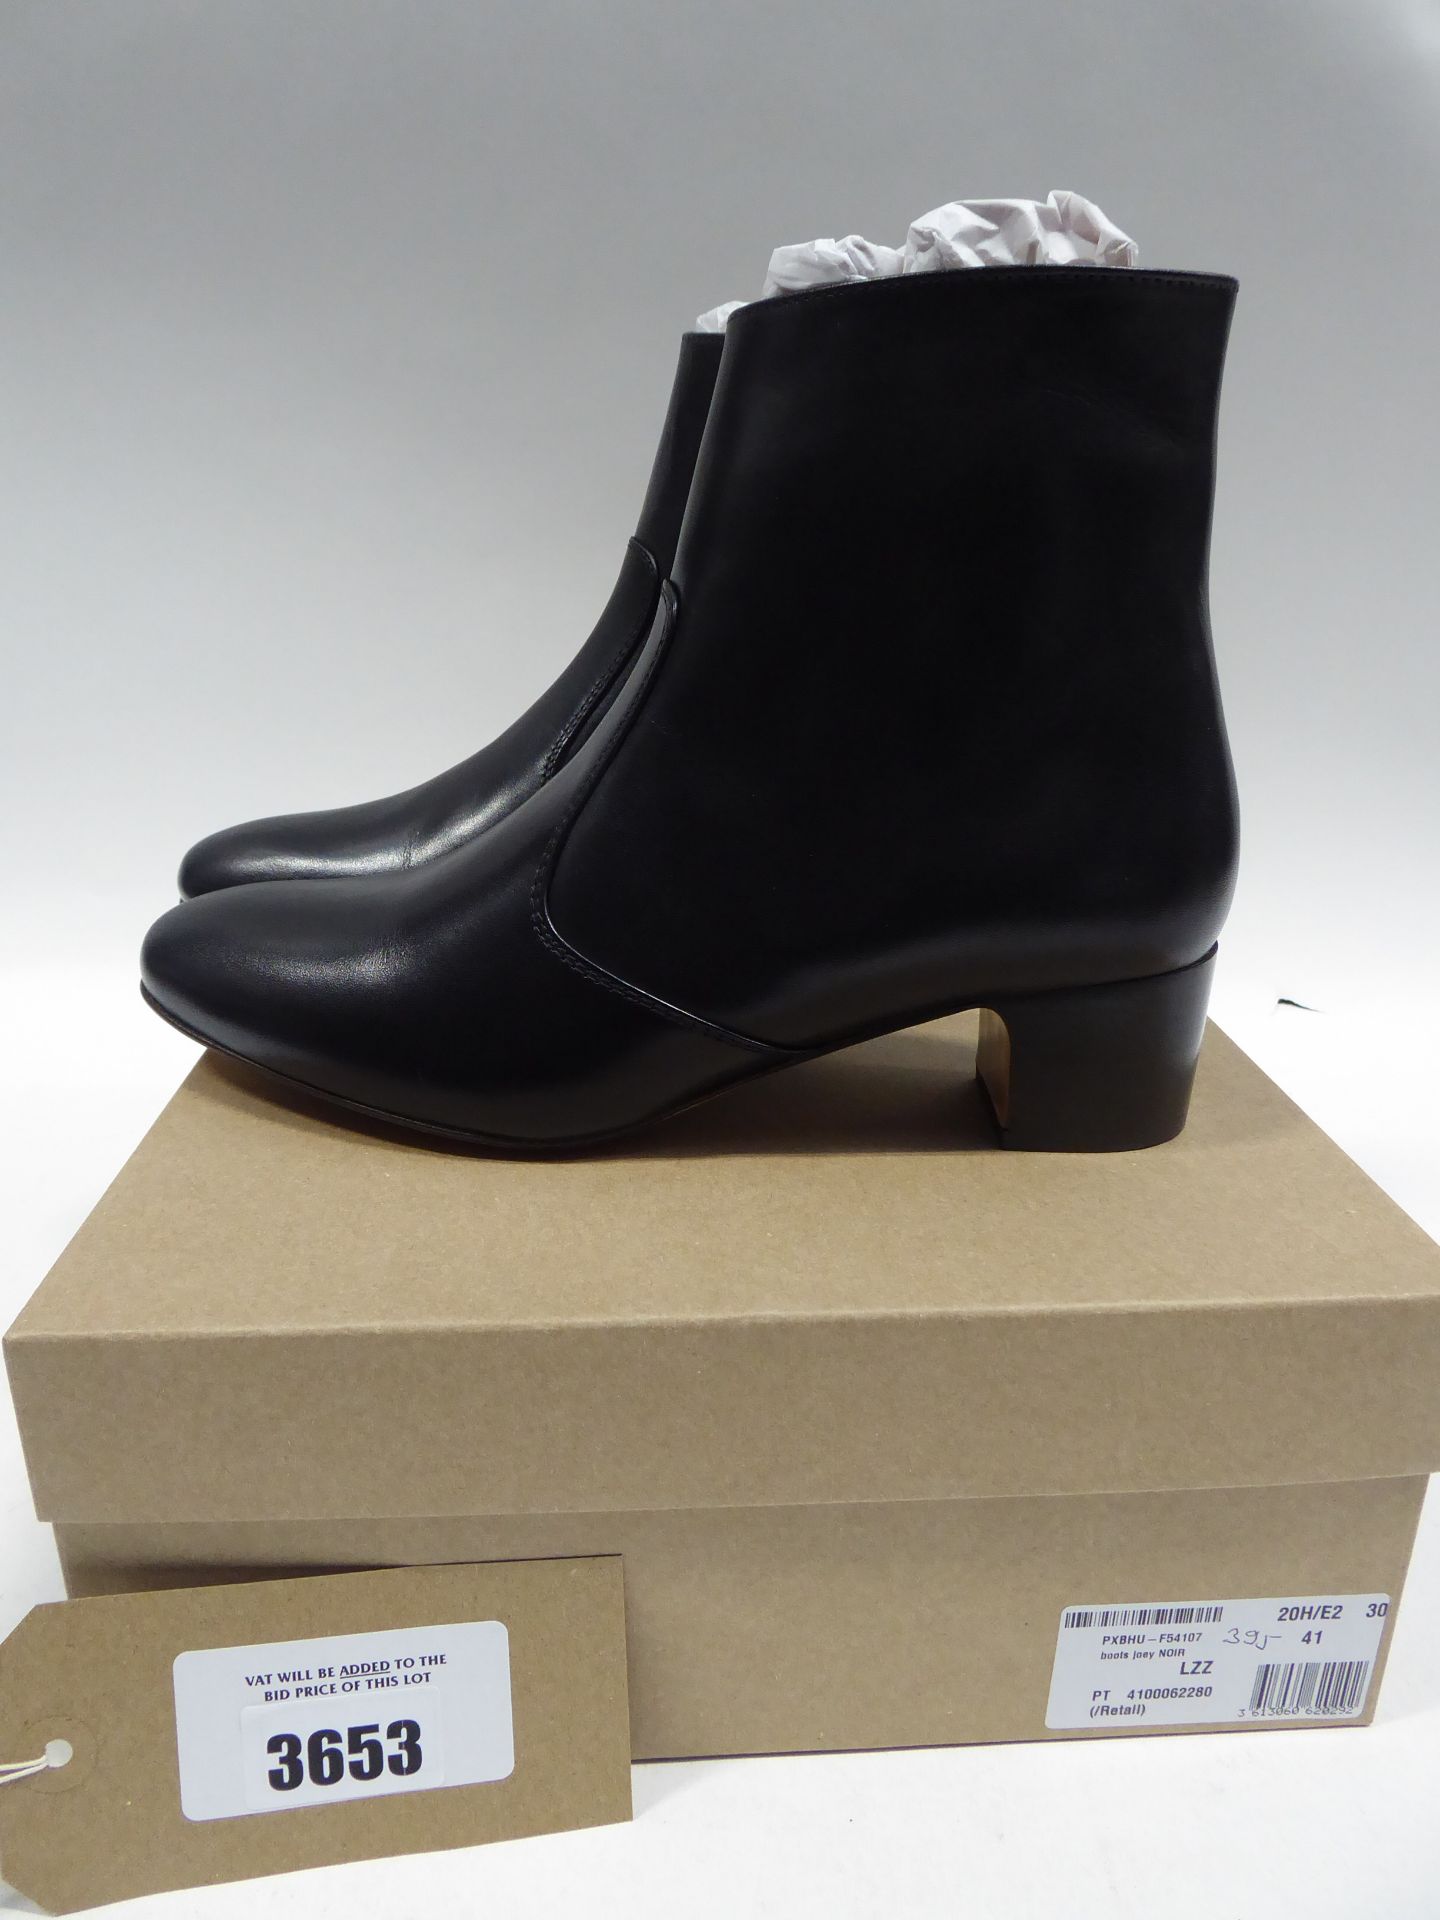 A.P.C Joey leather ankle boots size EU 41